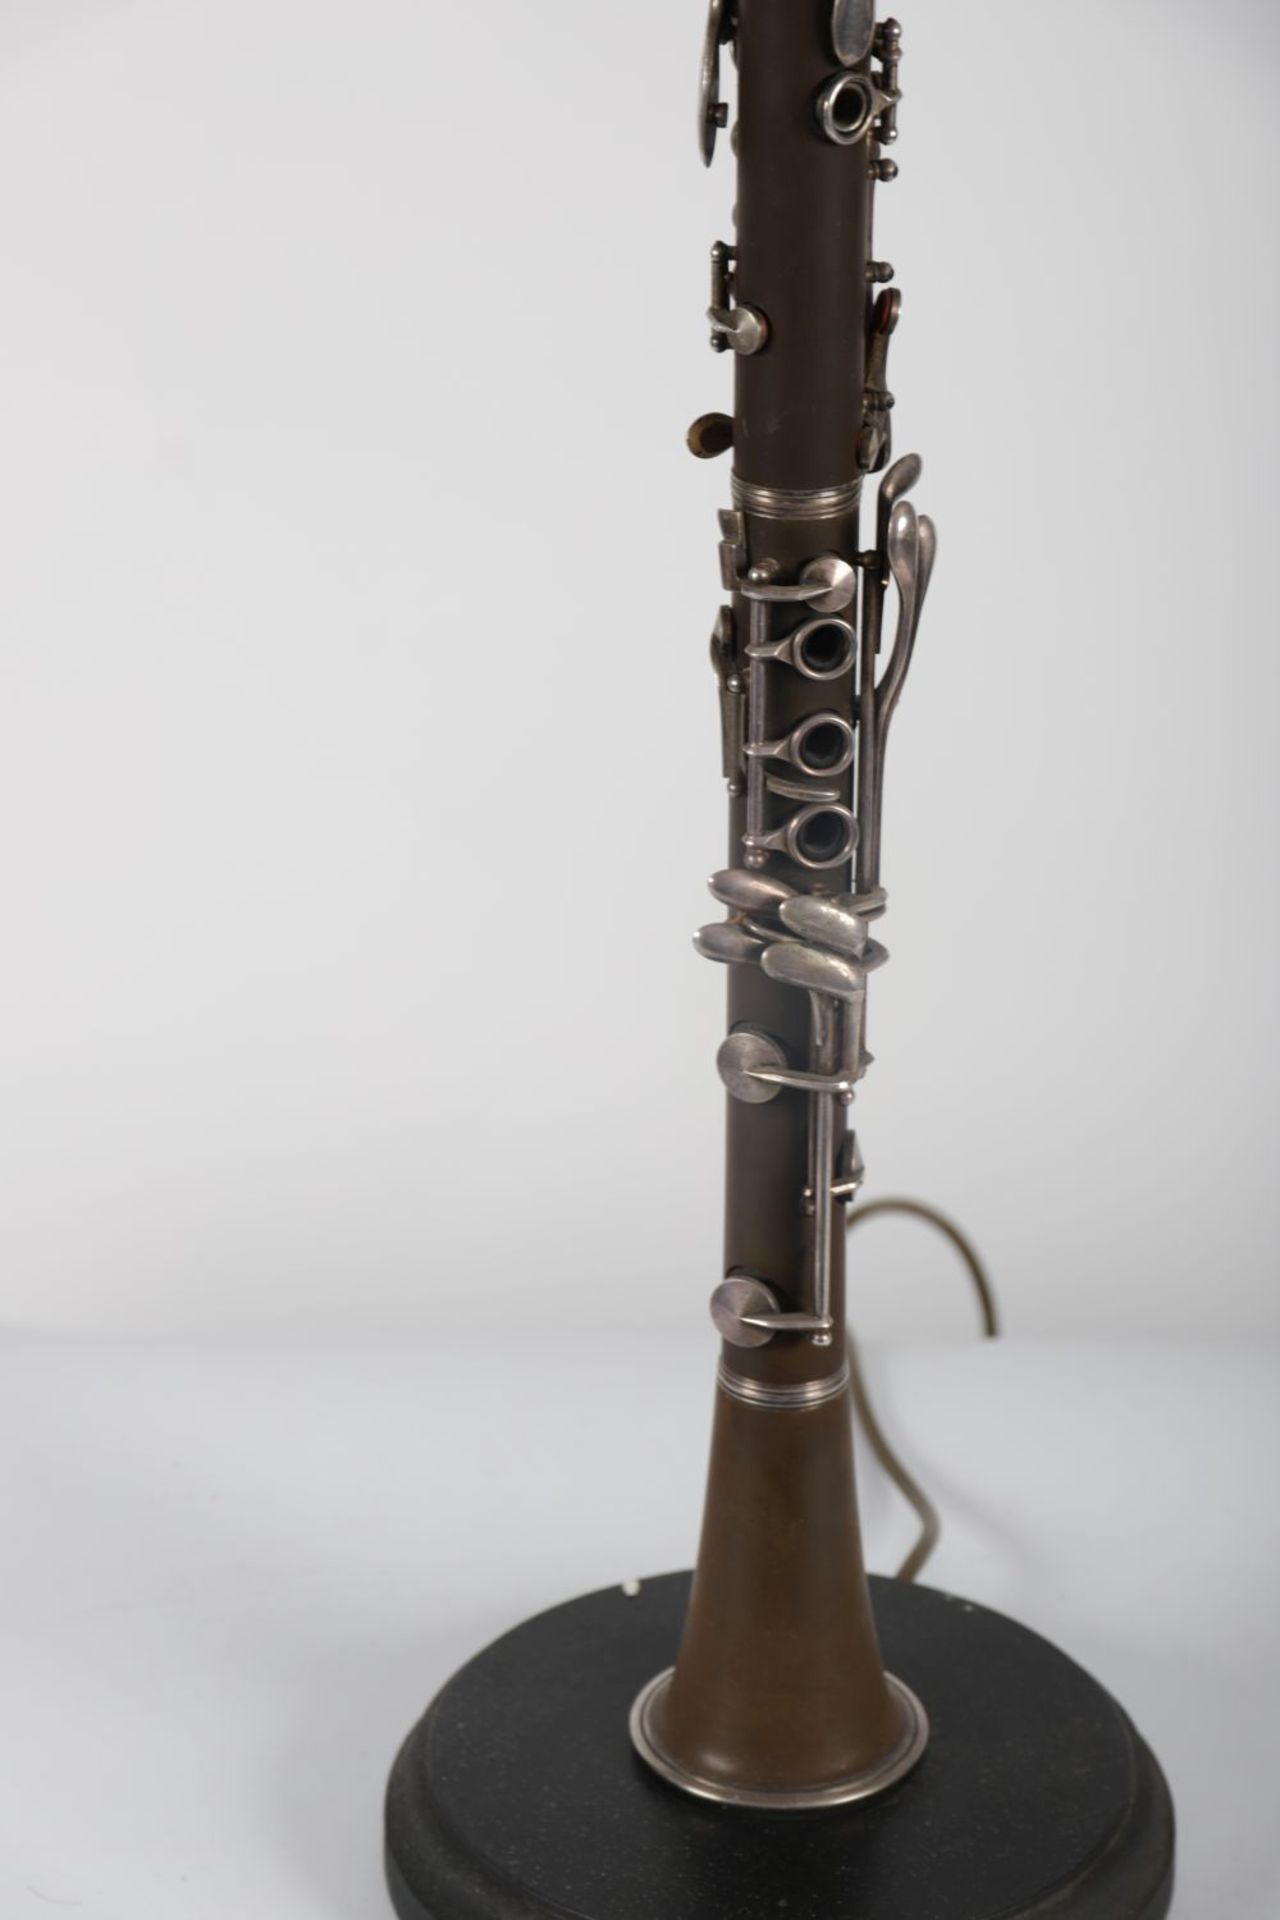 CLARINET STEMMED TABLE LAMP - Image 2 of 3